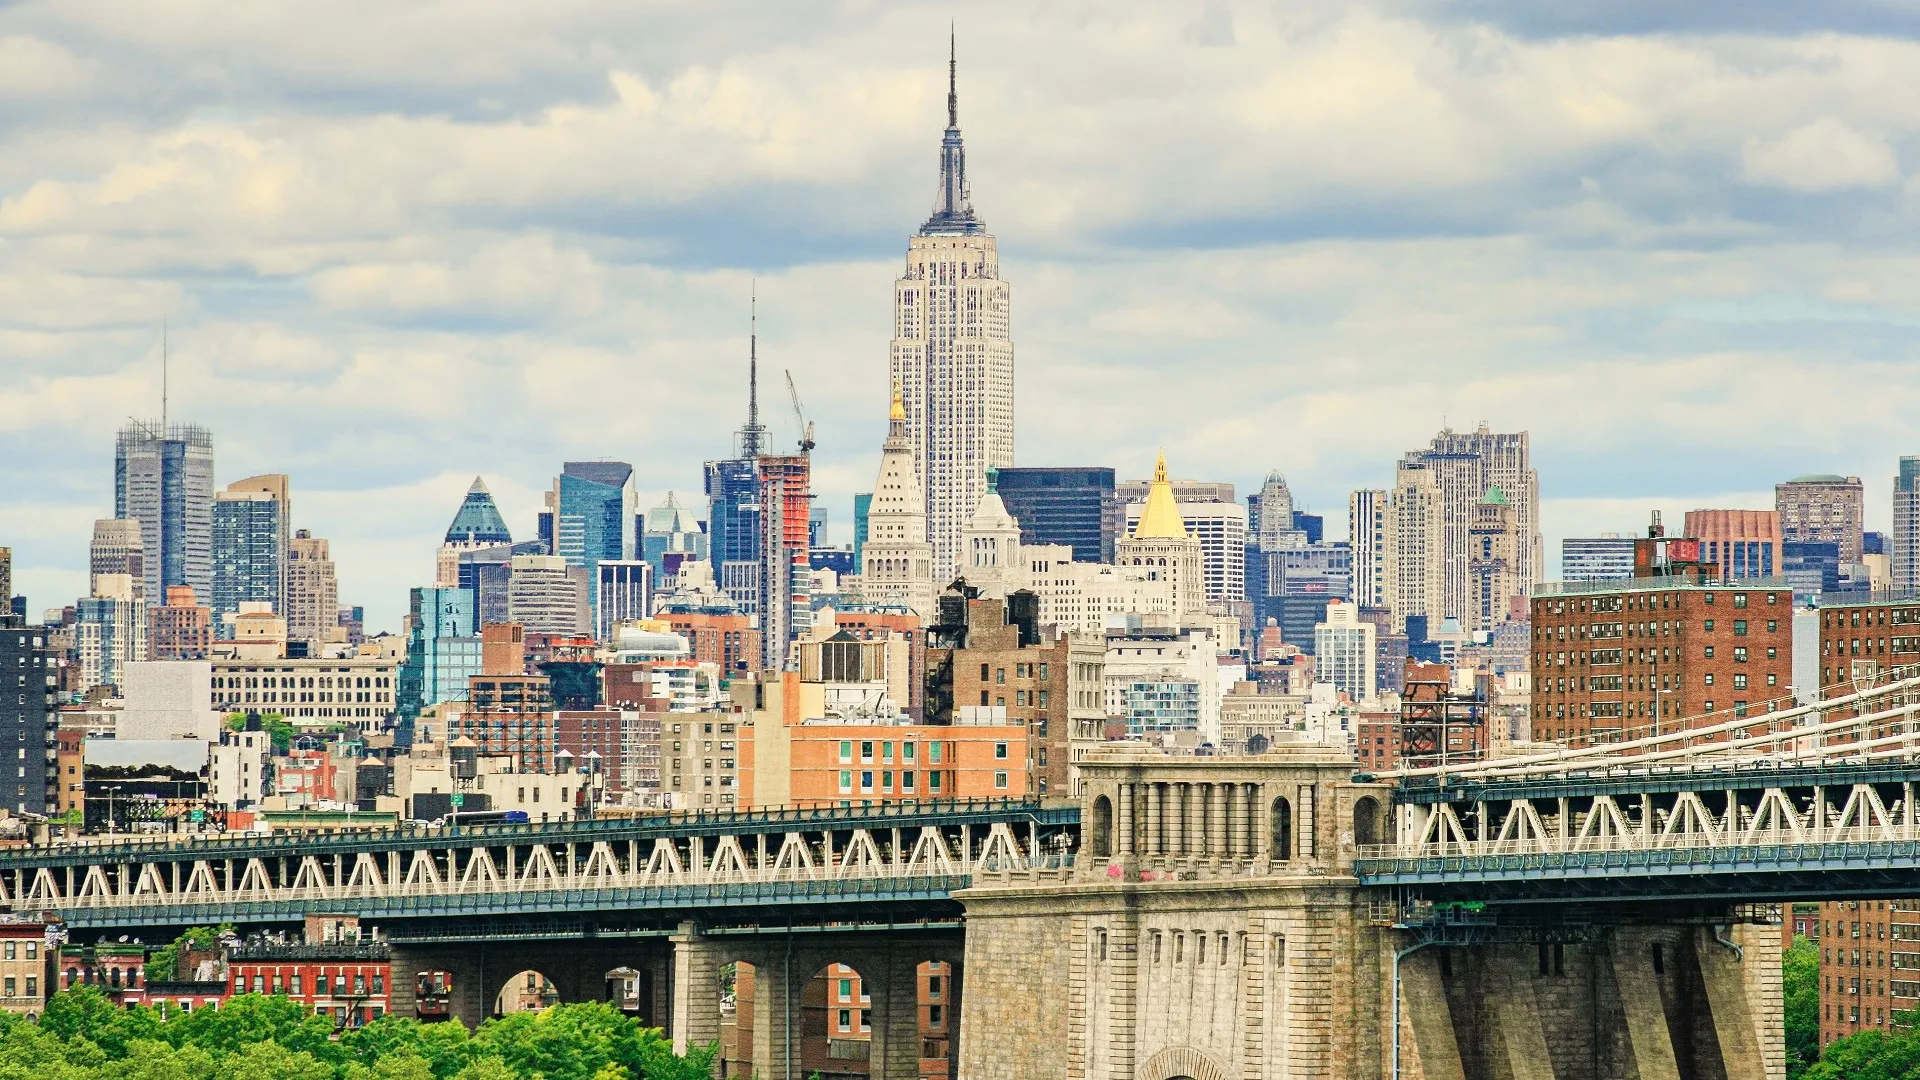 New York City Skyline with Empire State Building and Midtown Manhattan Skyscrapers. stock photo